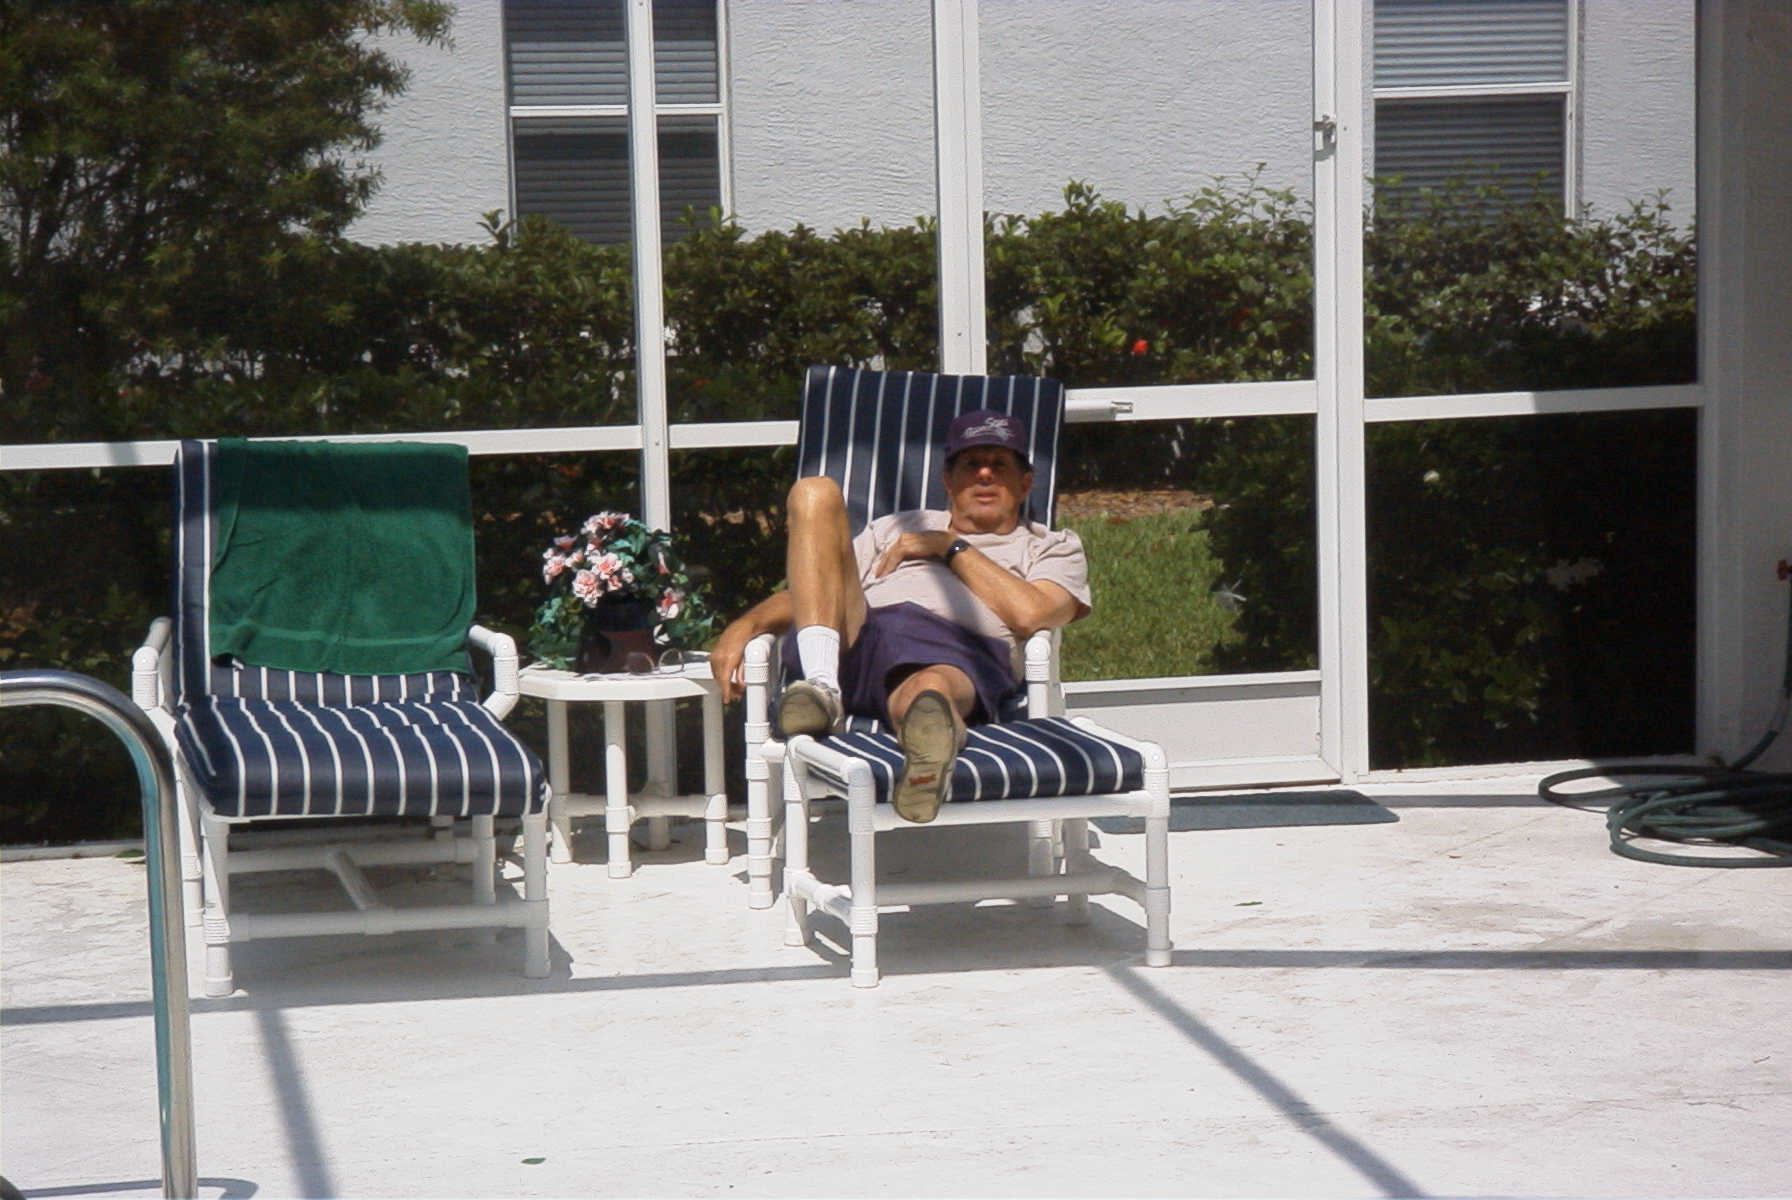 Joel relaxing by the pool. I miss him so much.